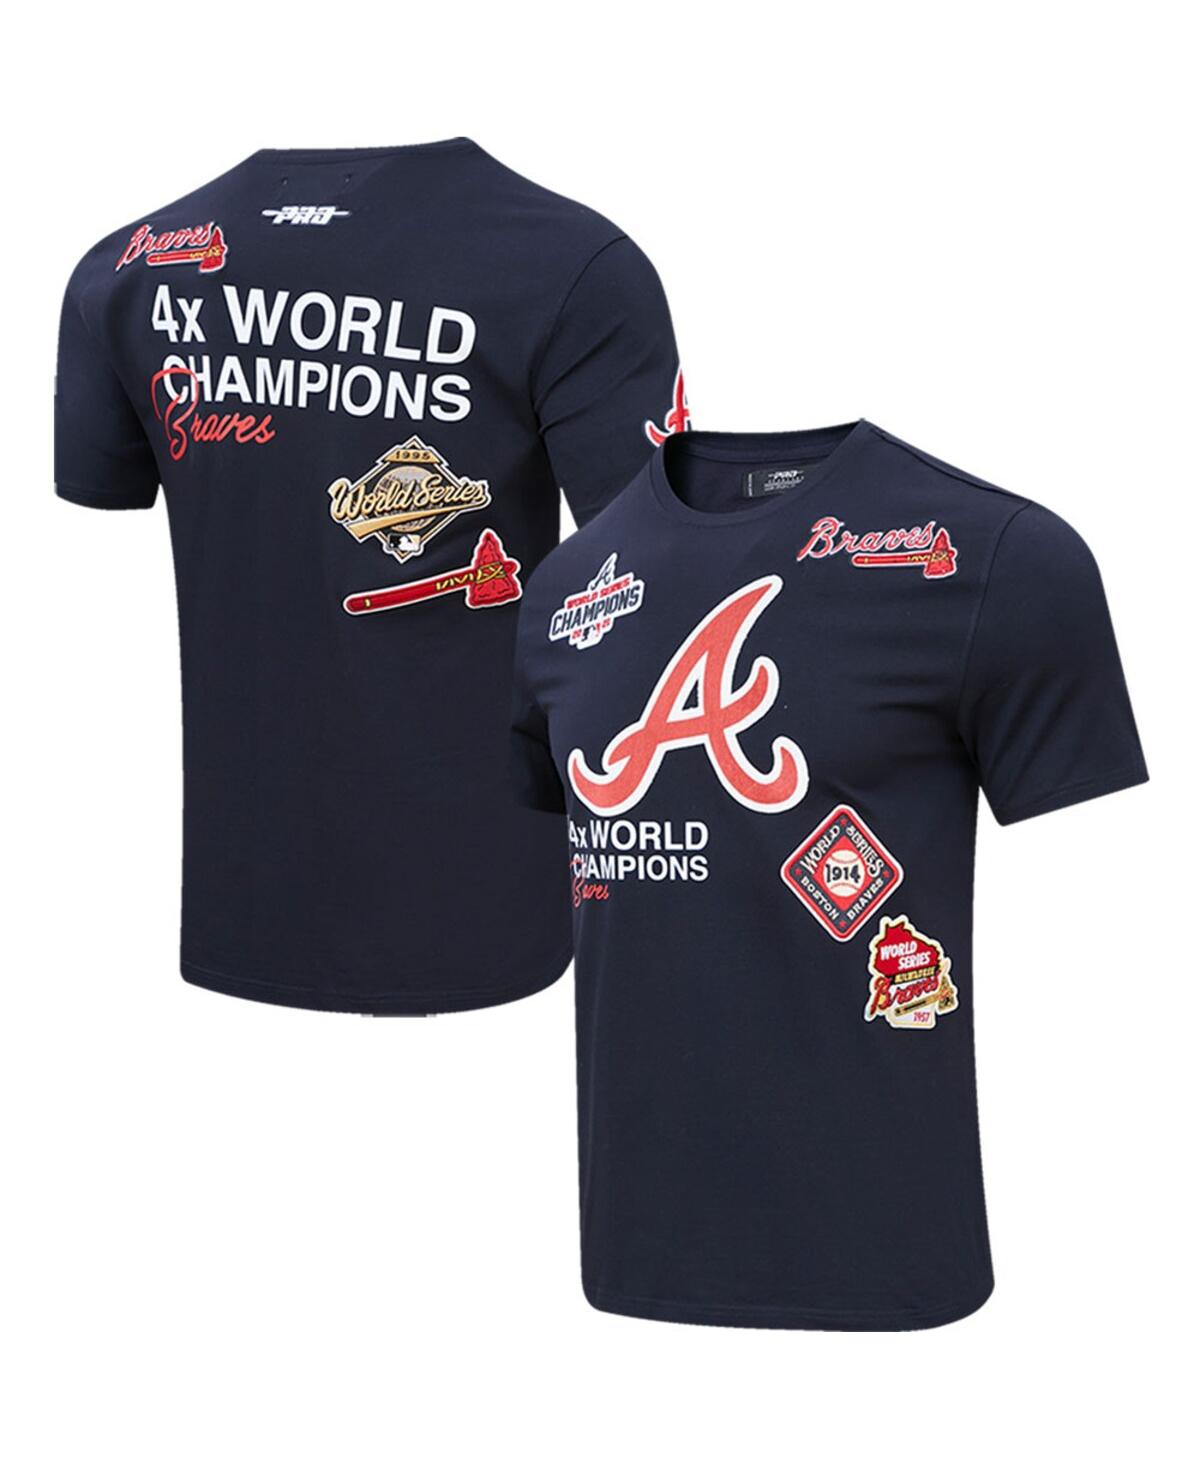 Women's Majestic Threads Charcoal Atlanta Braves 2021 World Series Champions Hometown Long Sleeve V-Neck T-Shirt Size: Small